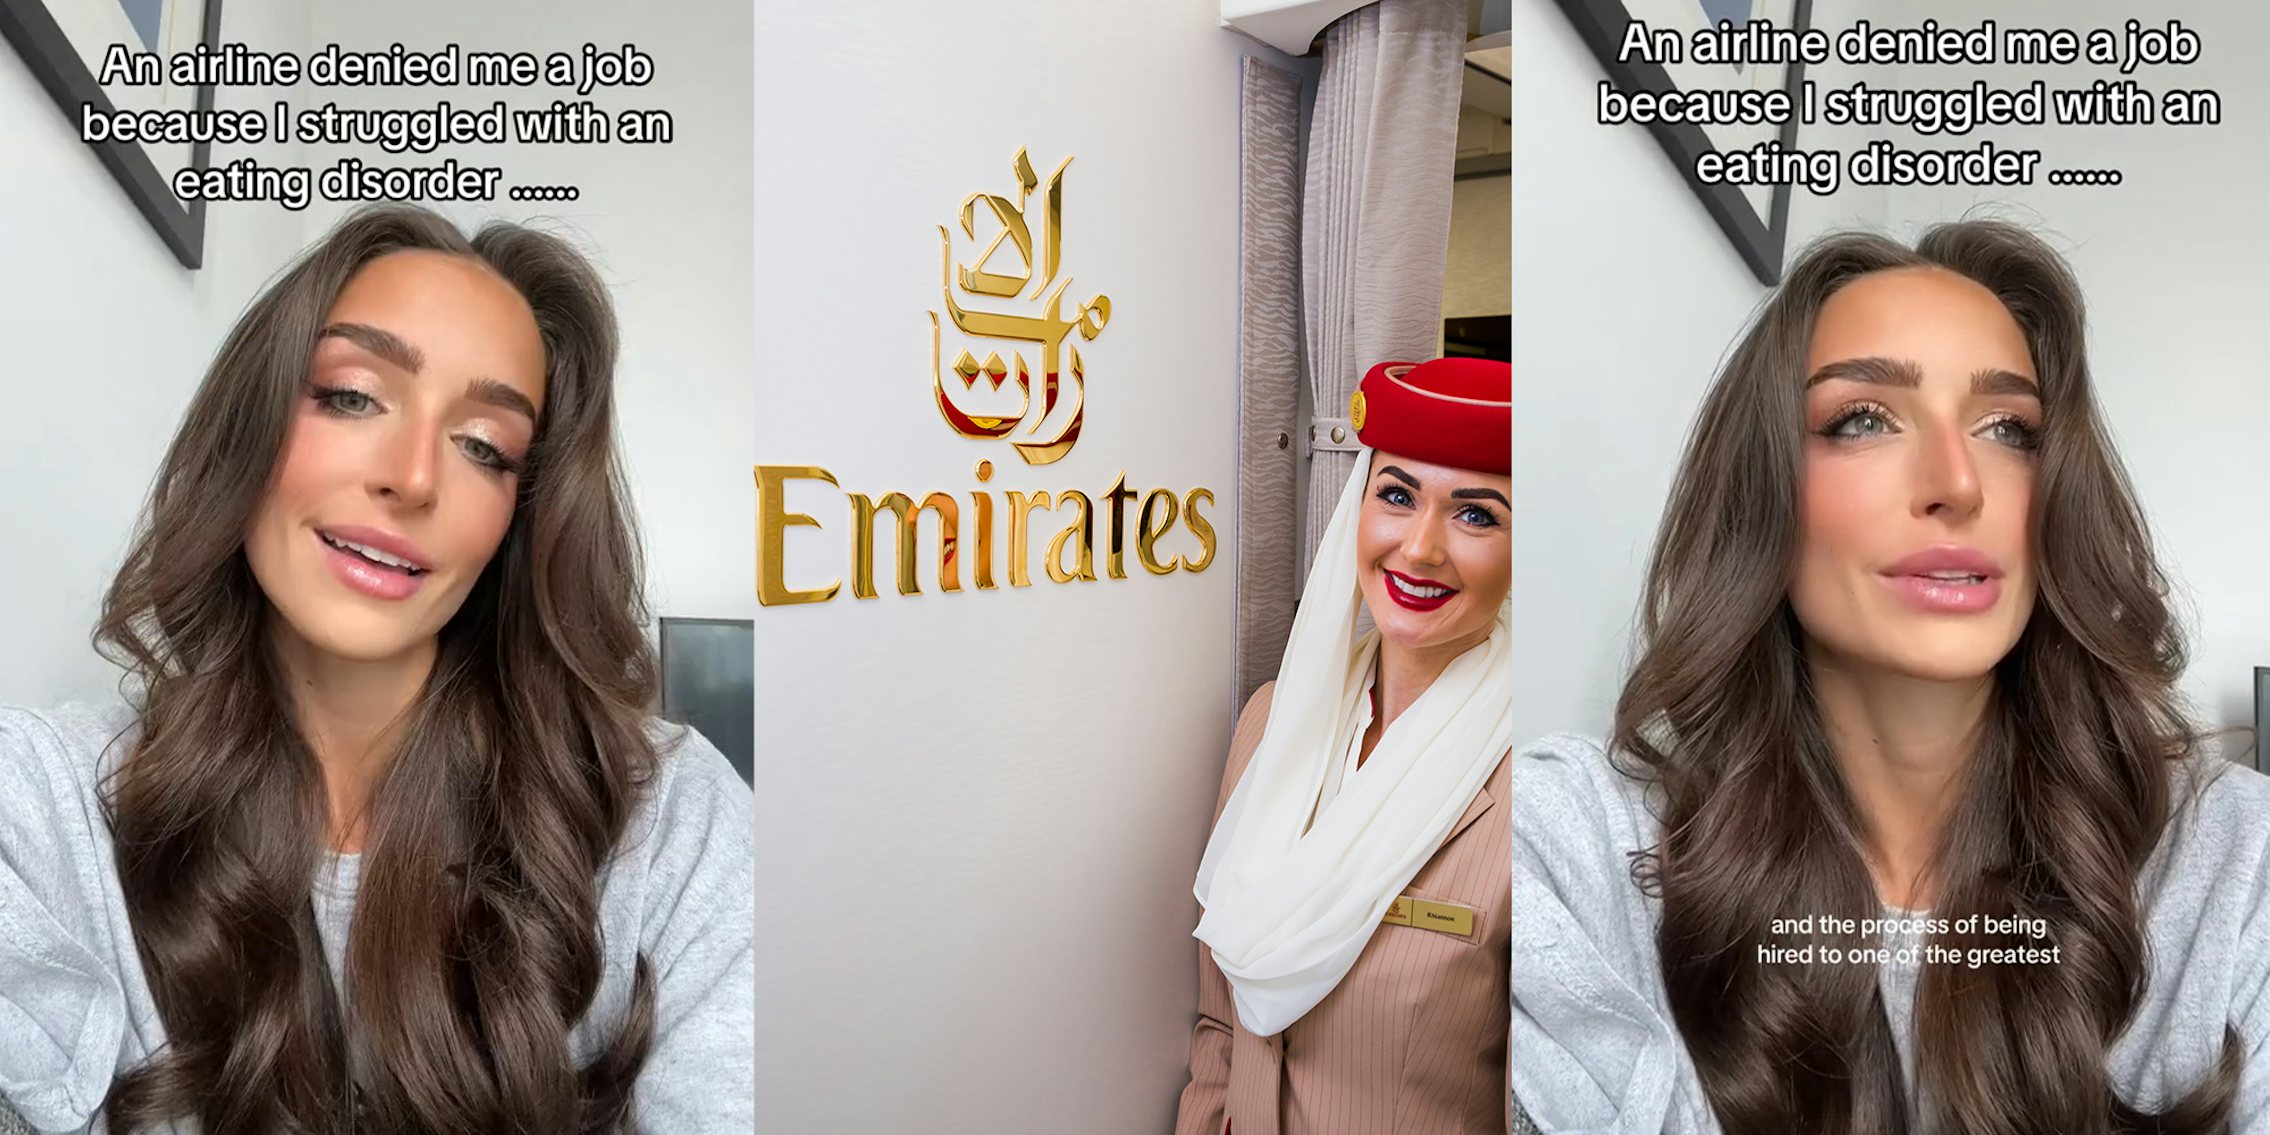 Woman says Emirates rescinded job offer after she disclosed she had eat disorder when she was younger